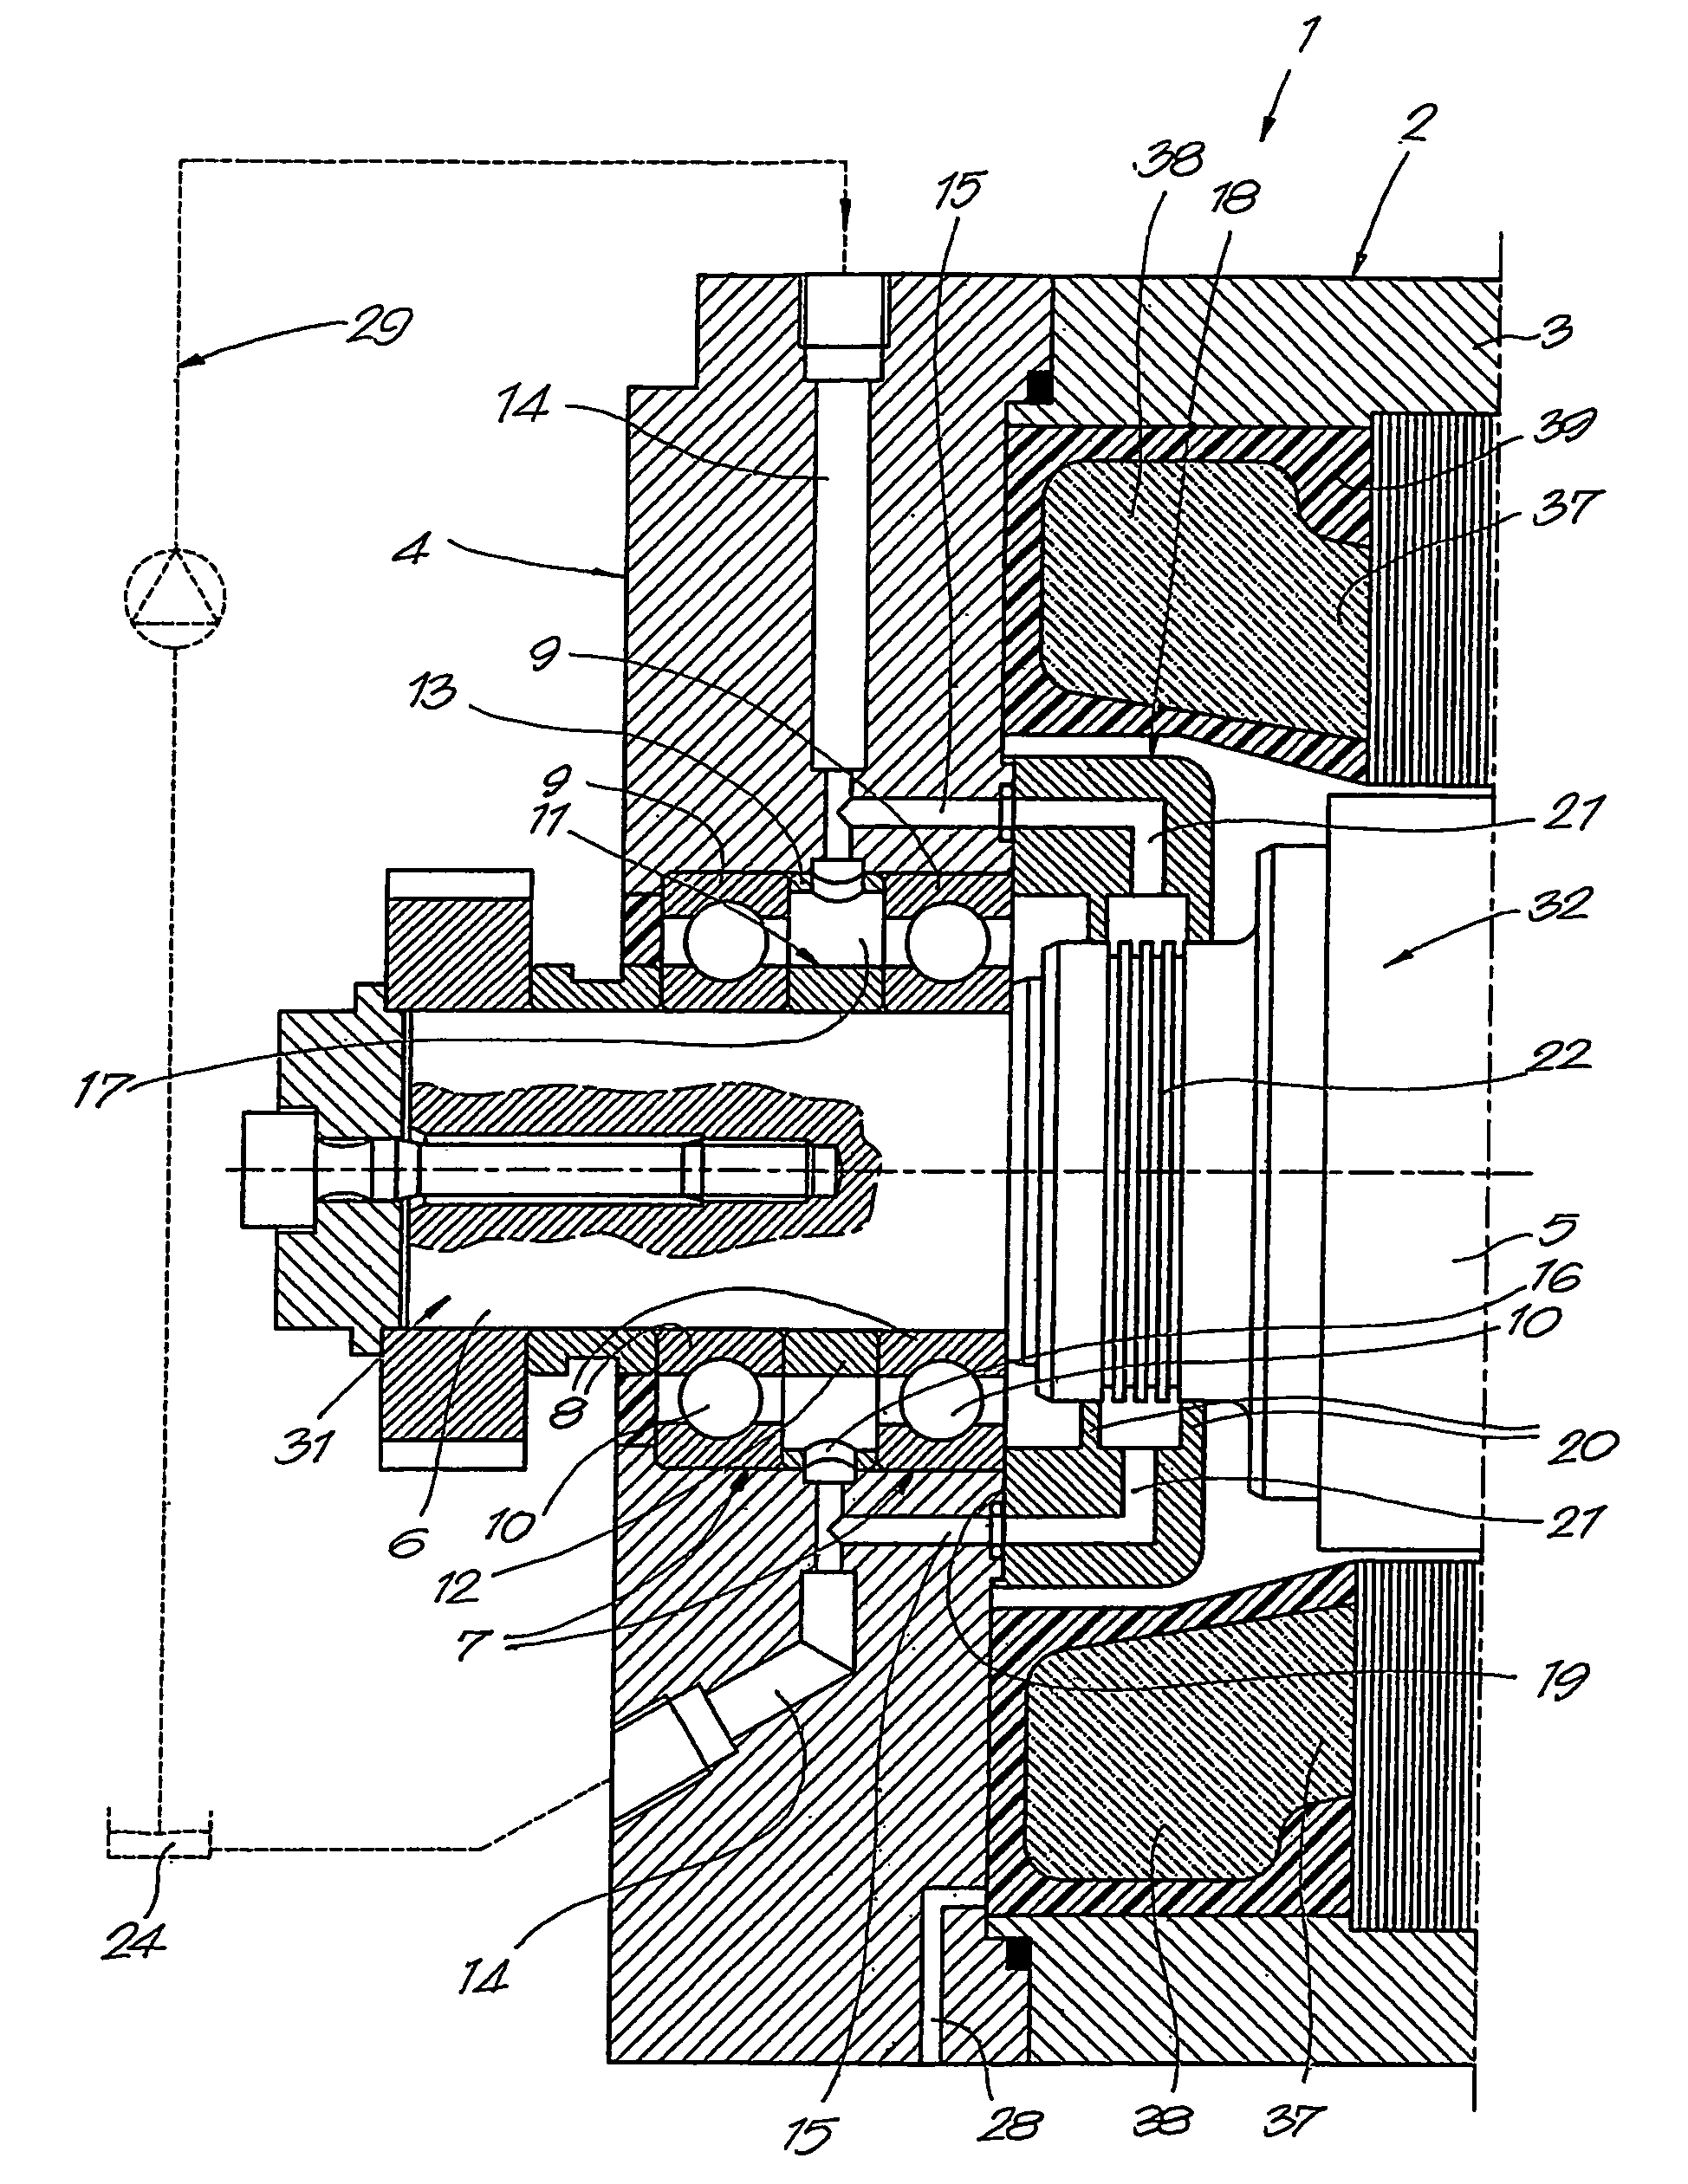 Machine with an improved bearing lubrication